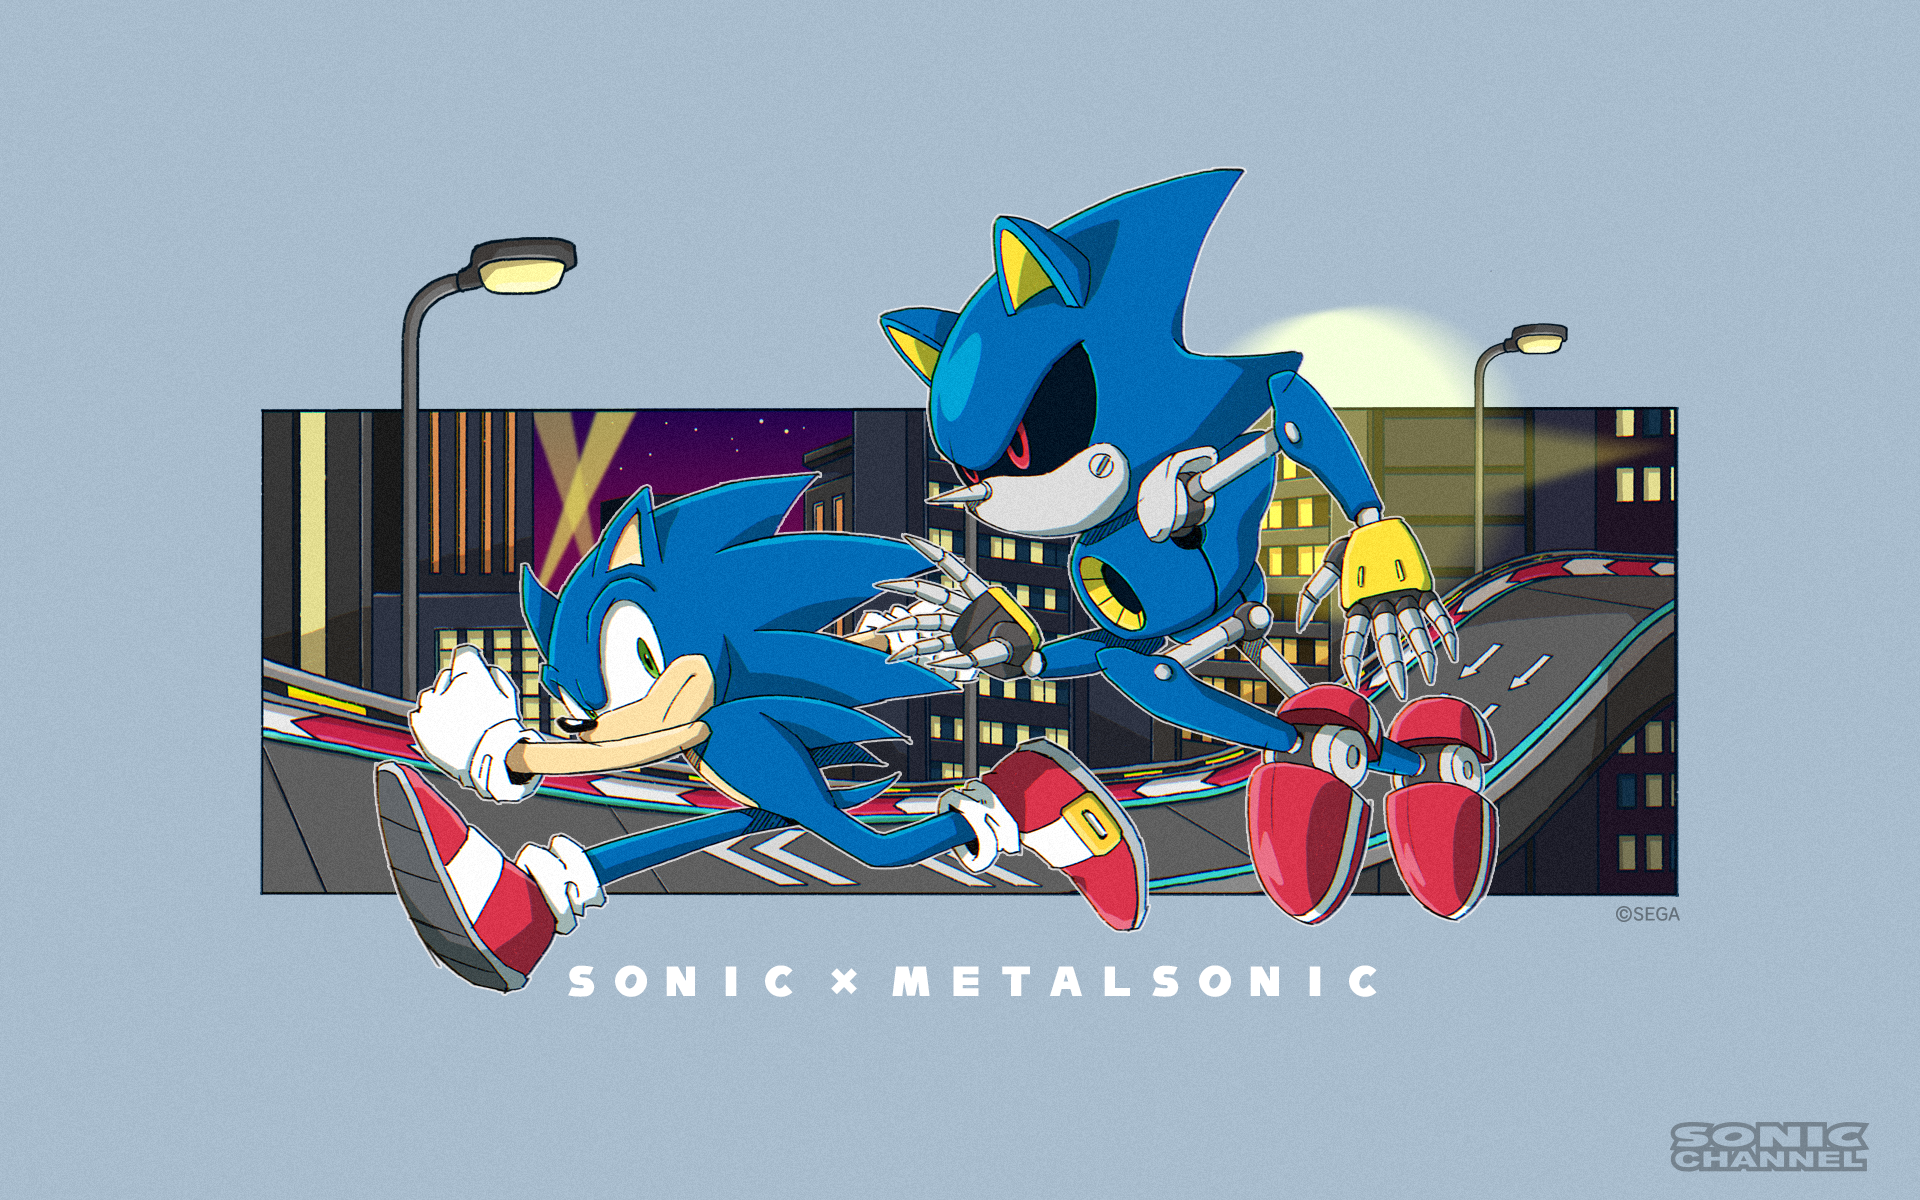 Sonic Channel Wallpaper Cover Story: Sonic & Shadow (July 2021) – Windii's  Brownie Hideout